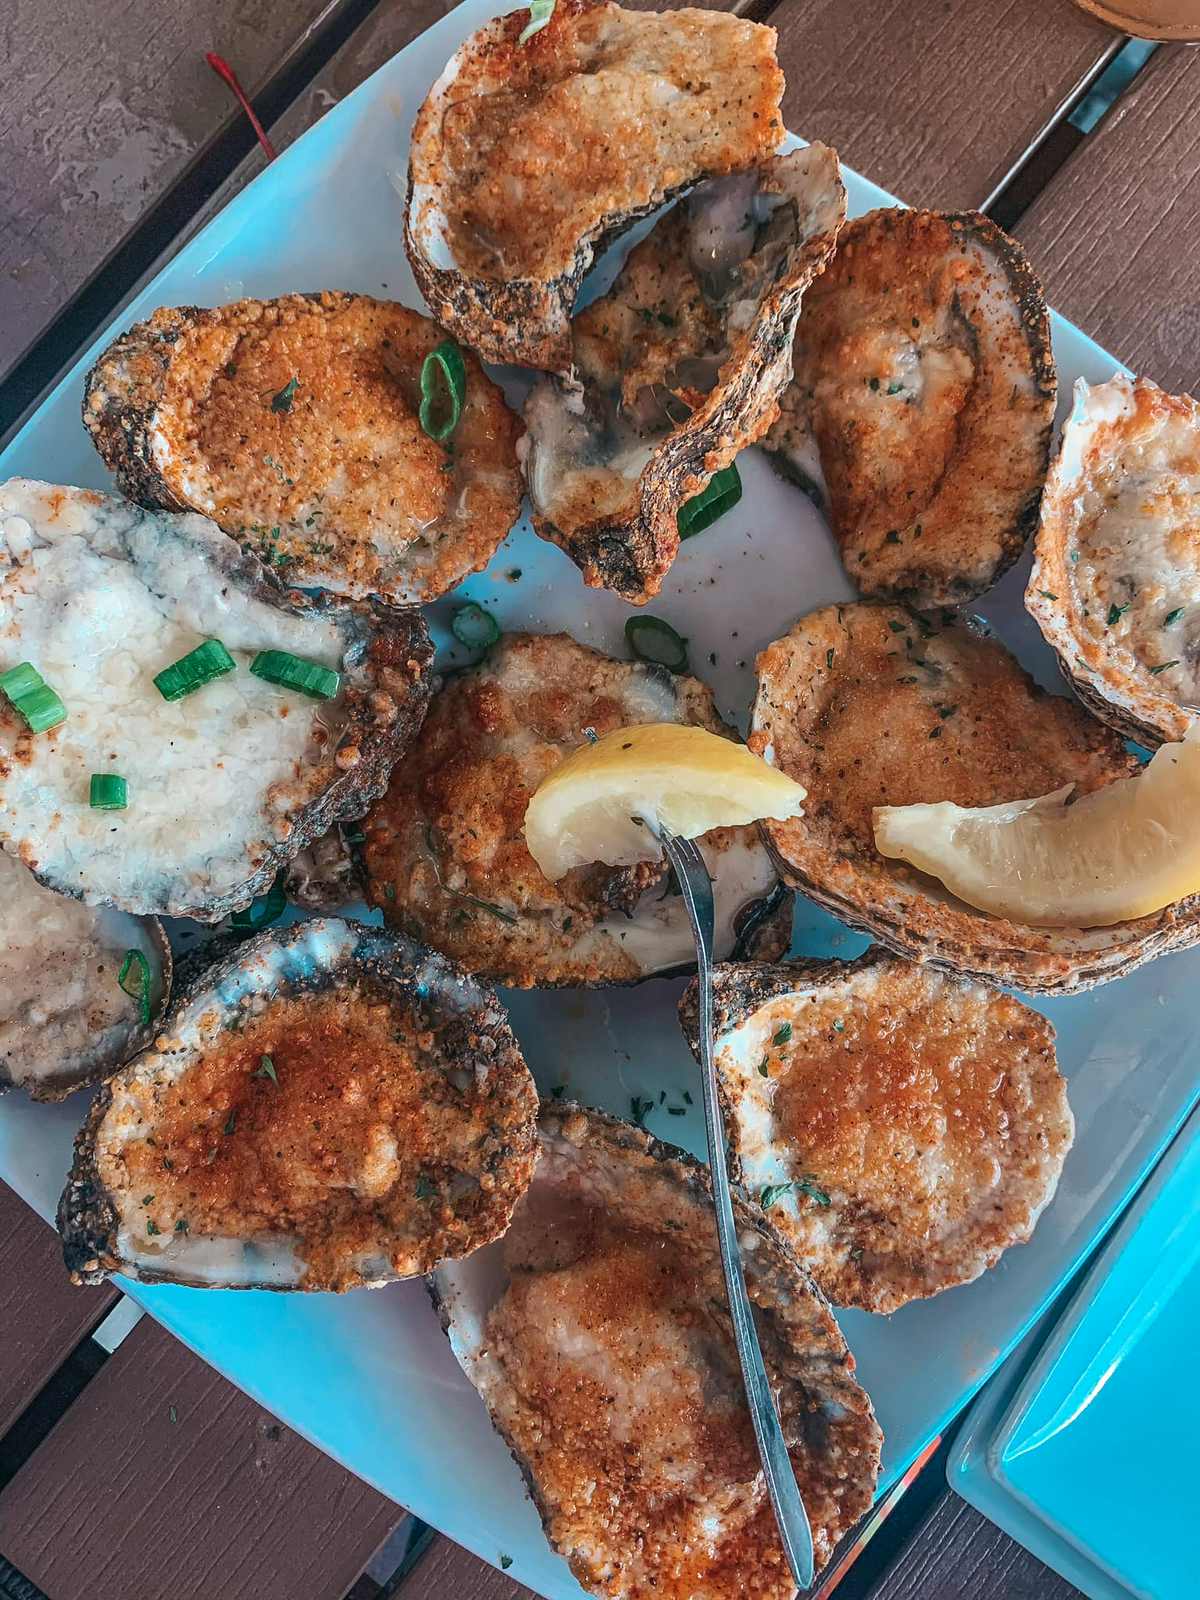 Broiled oysters from Salty's restaurant Clearwater Beach